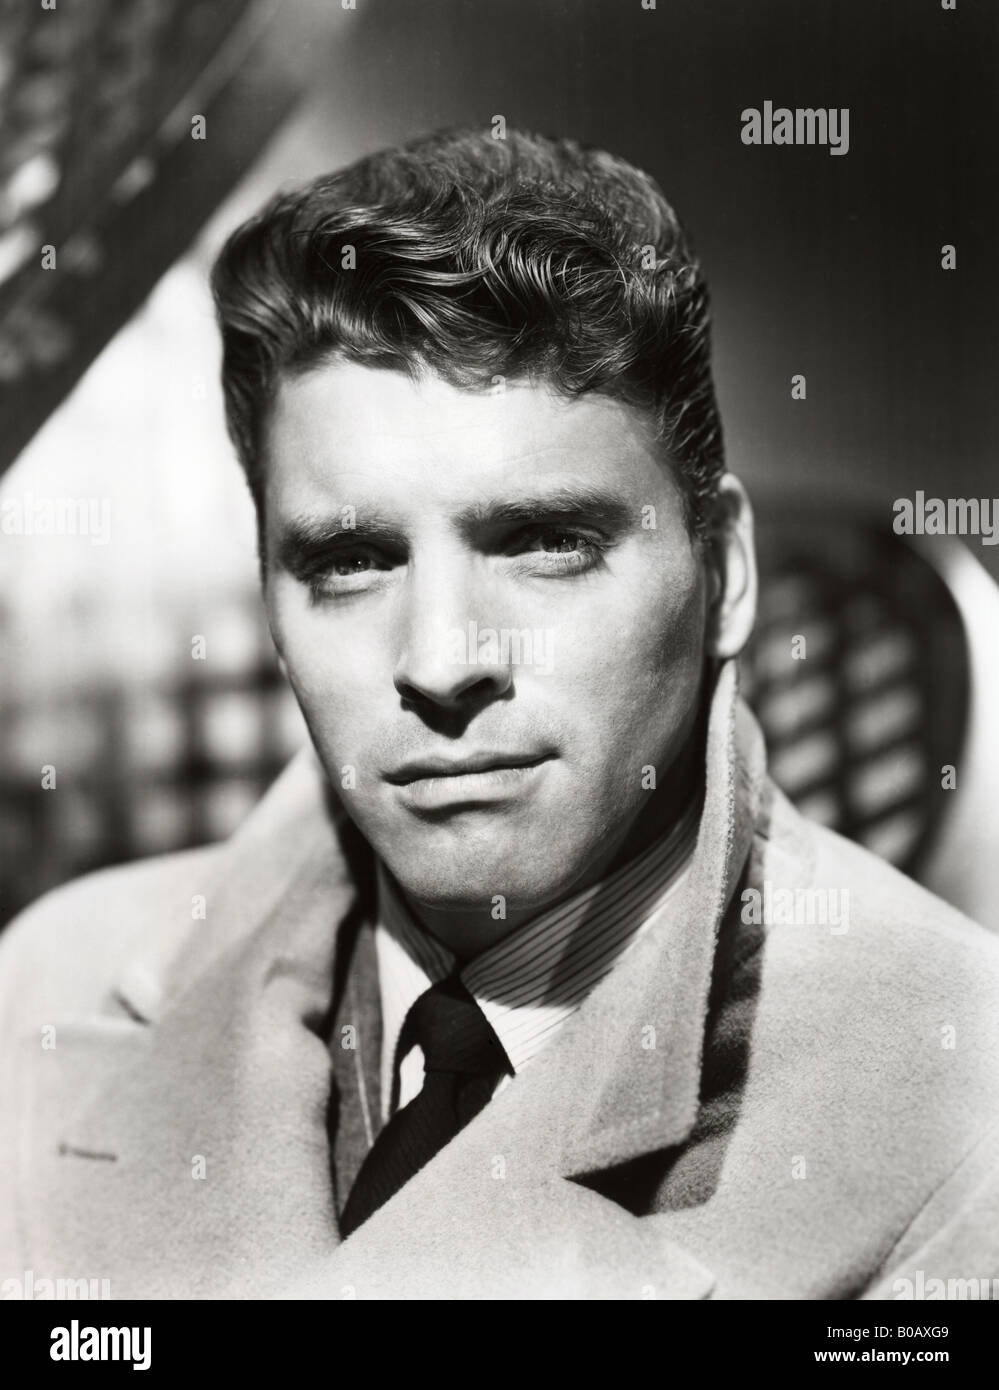 Burt Lancaster High Resolution Stock Photography and Images - Alamy